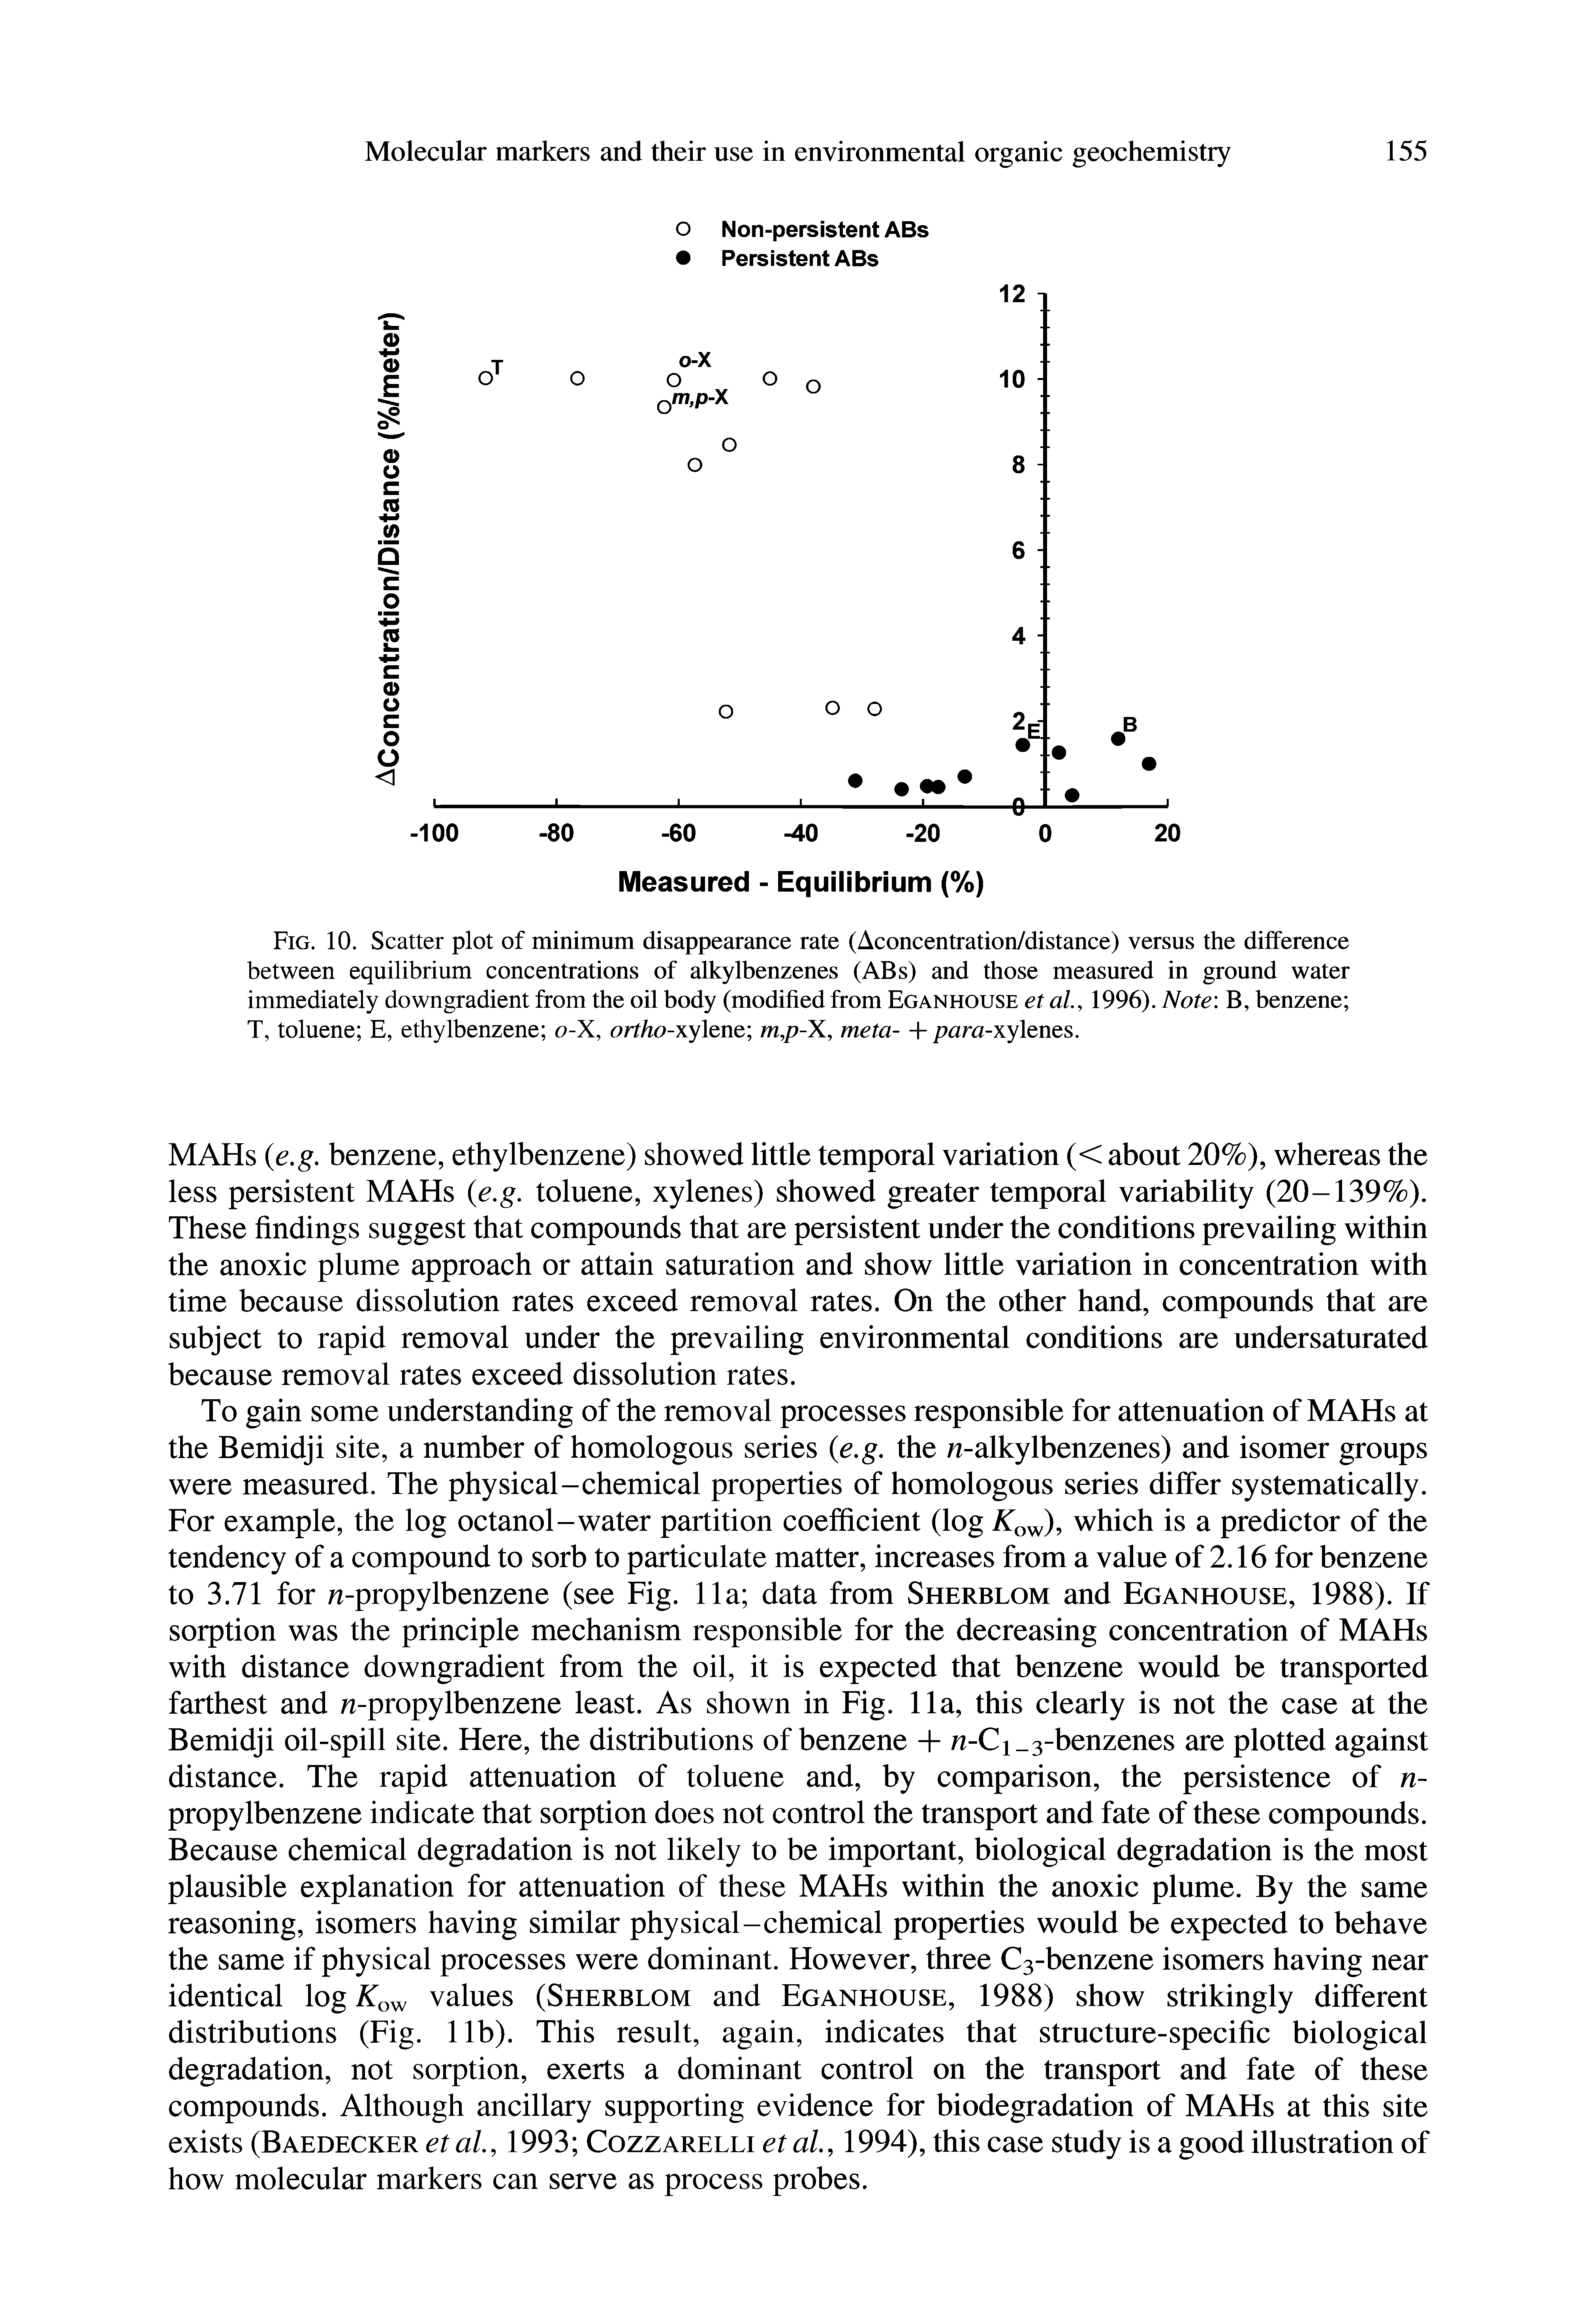 Fig. 10. Scatter plot of minimum disappearance rate (Aconcentration/distance) versus the difference between equilibrium concentrations of alkylbenzenes (ABs) and those measured in ground water immediately downgradient from the oil body (modified from Eganhouse et al, 1996). Note B, benzene T, toluene E, ethylbenzene o-X, orr/io-xylene m,p-X, meta- + para-xylenes.